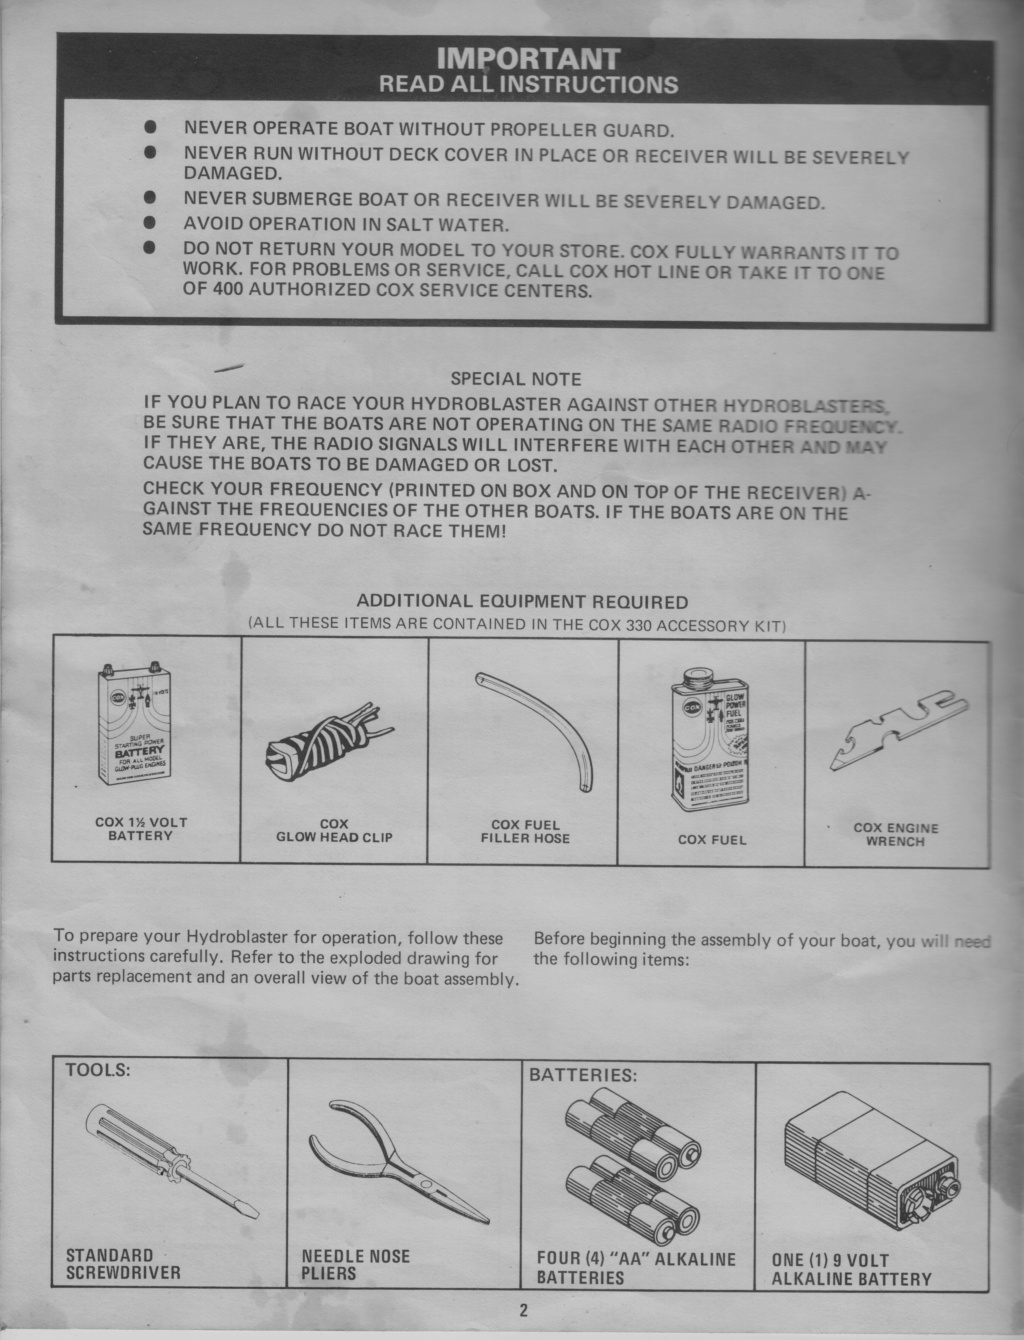 Hydro Blaster pictures and manual scans . Hydro_10